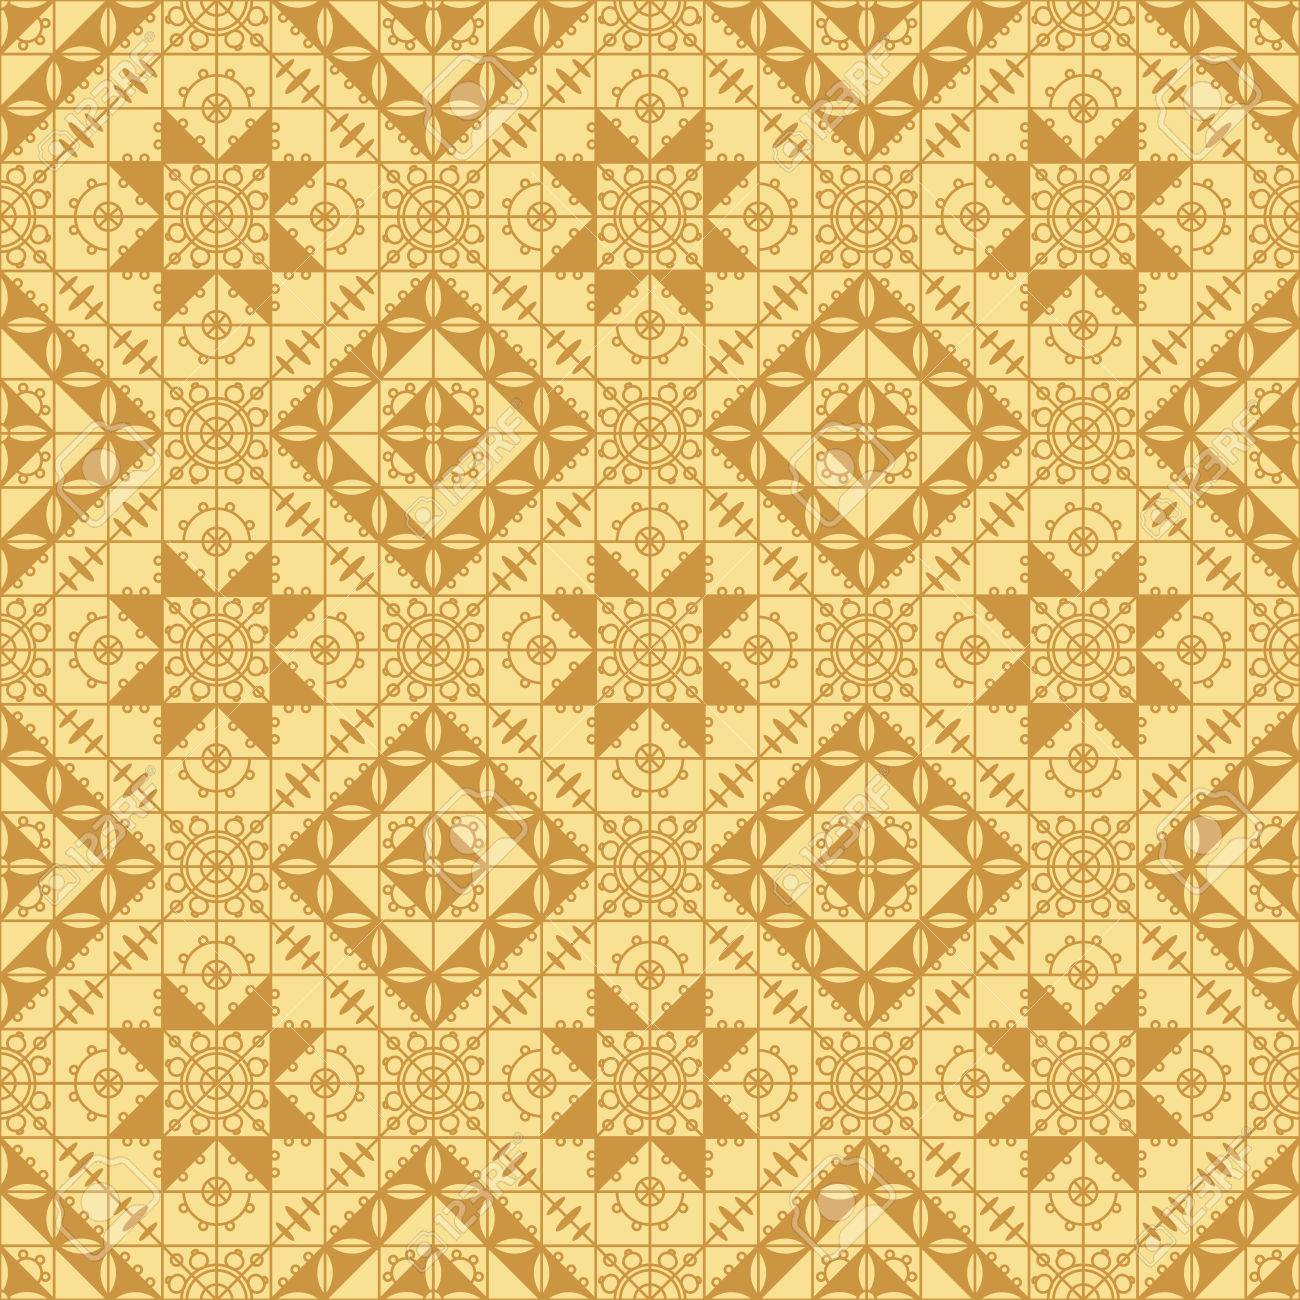 Seamless Vintage Background Wallpaper Repeating